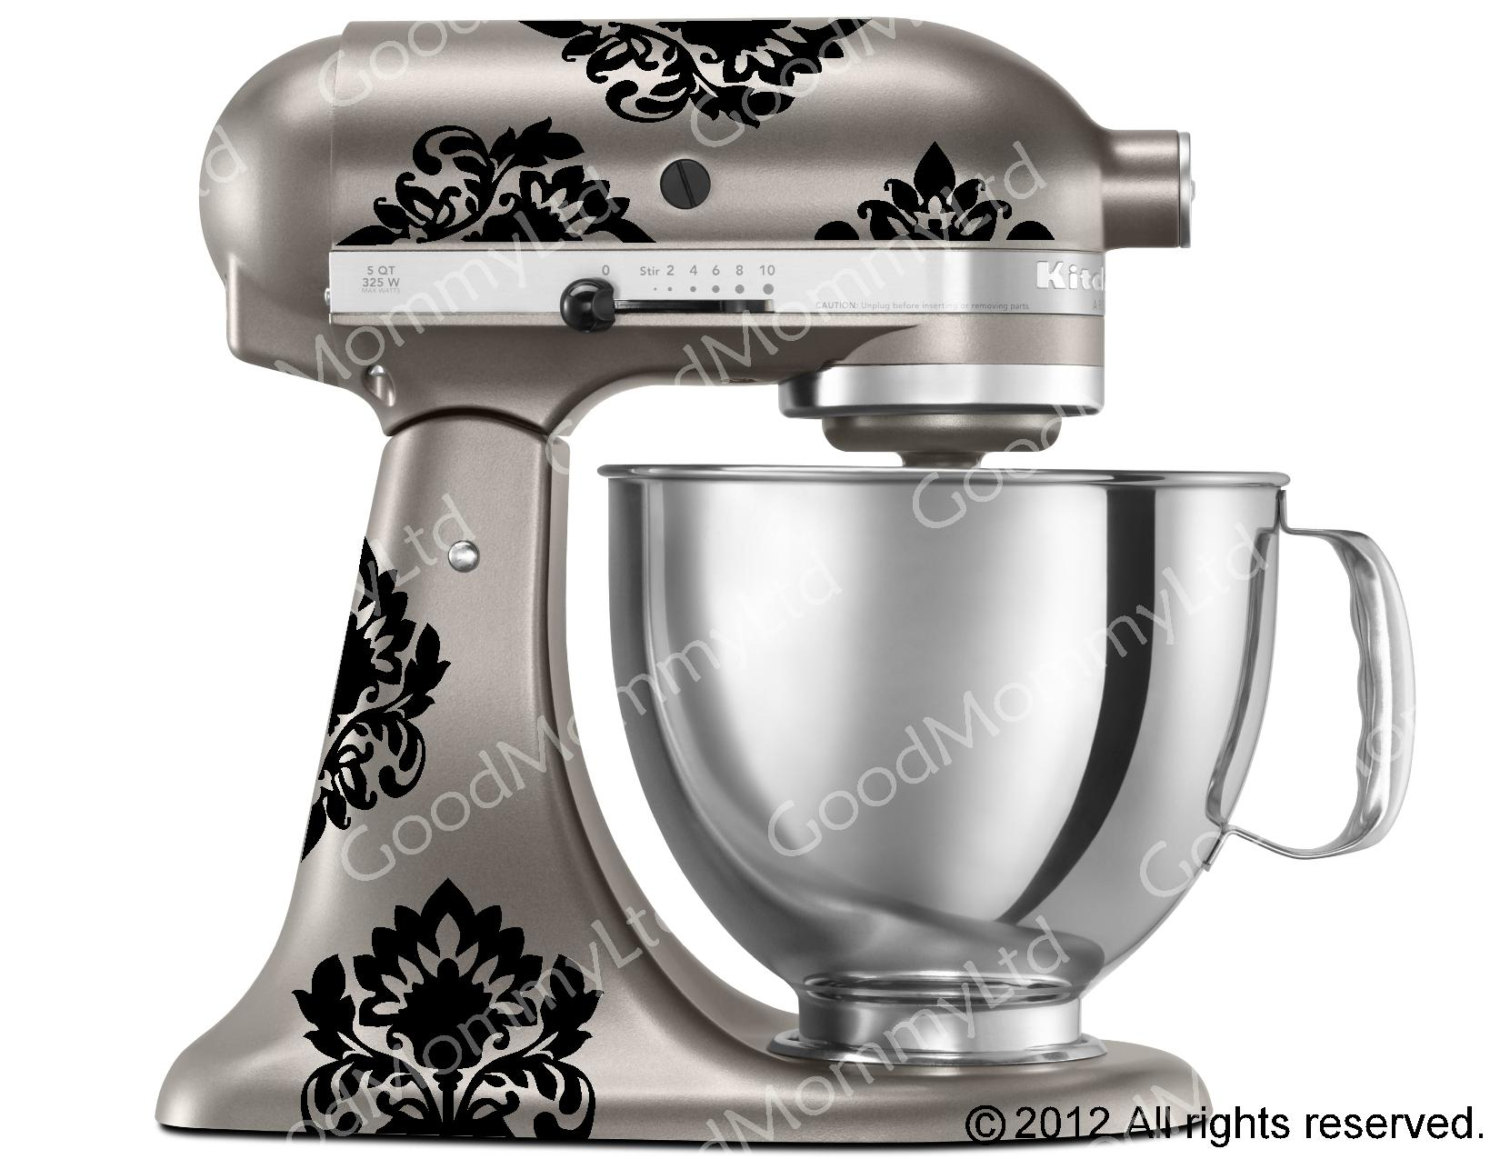 Where can you register your Kitchenaid mixer?